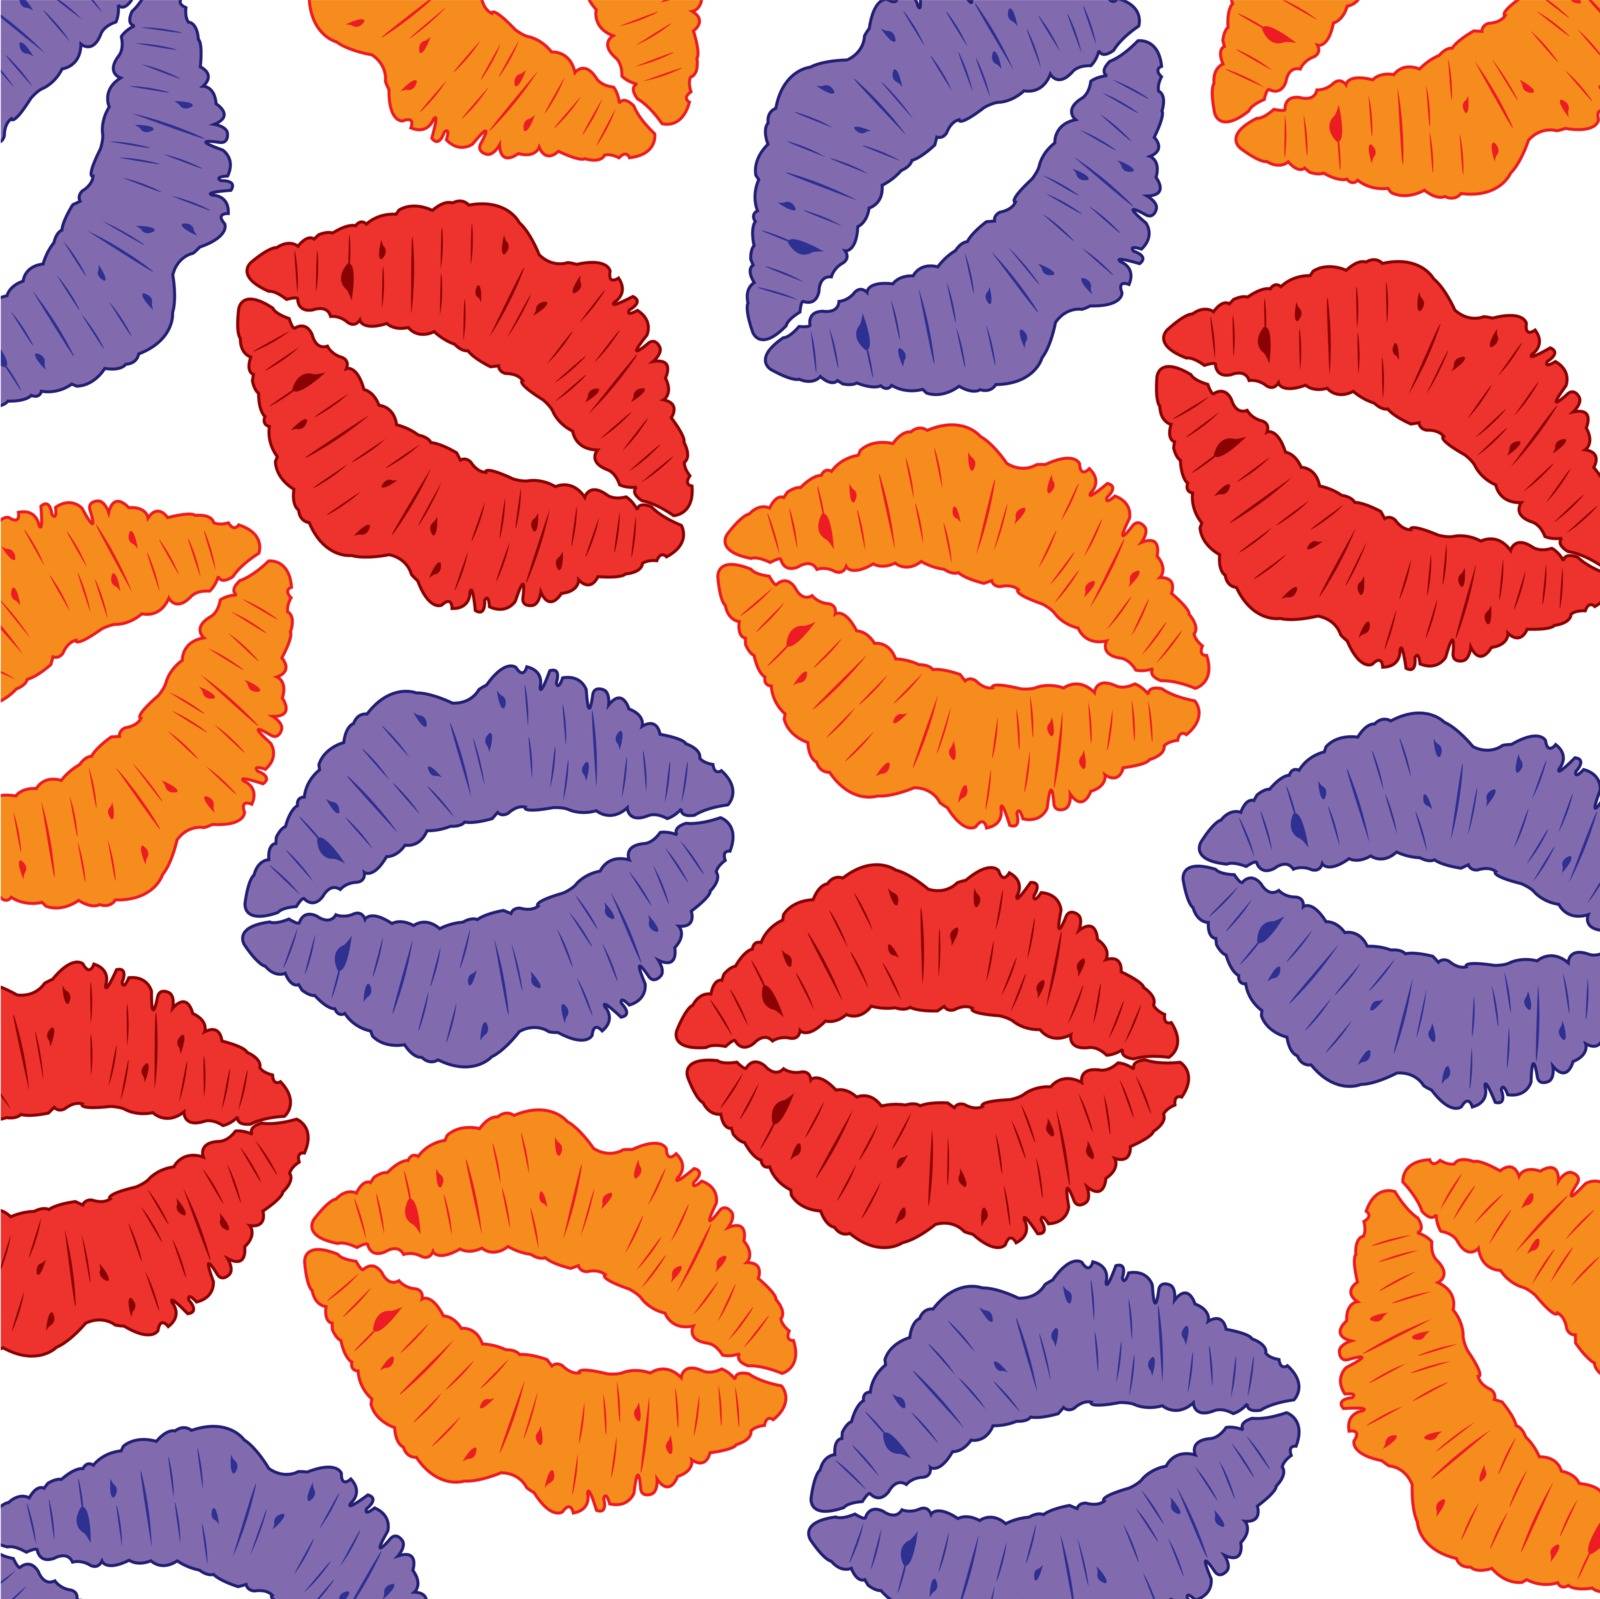 Feminine lips of the miscellaneous of the colour.Vector illustration